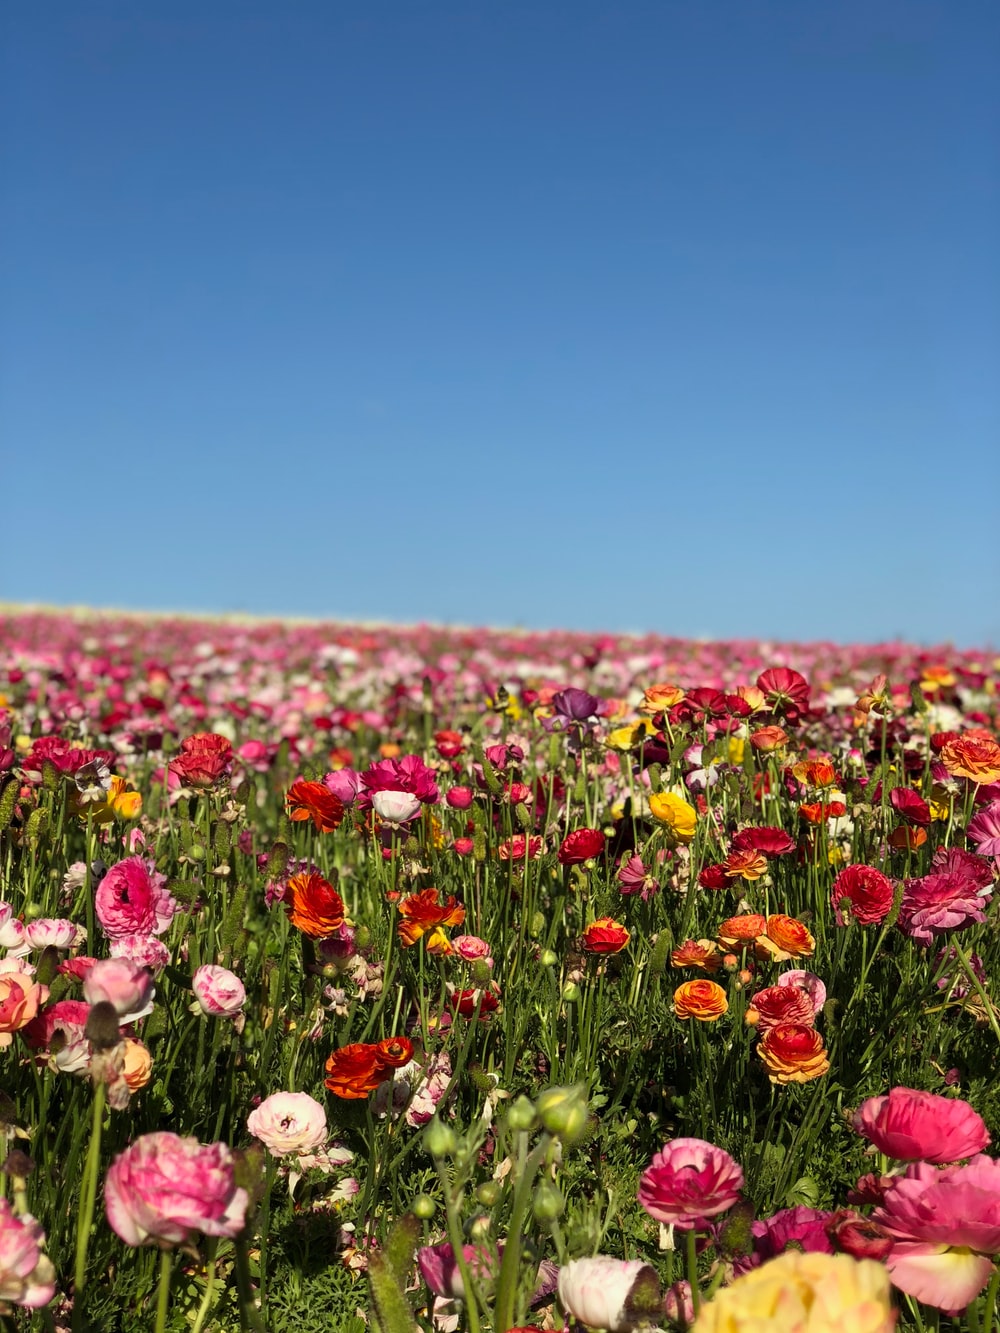 Field Of Flowers Picture. Download Free Image